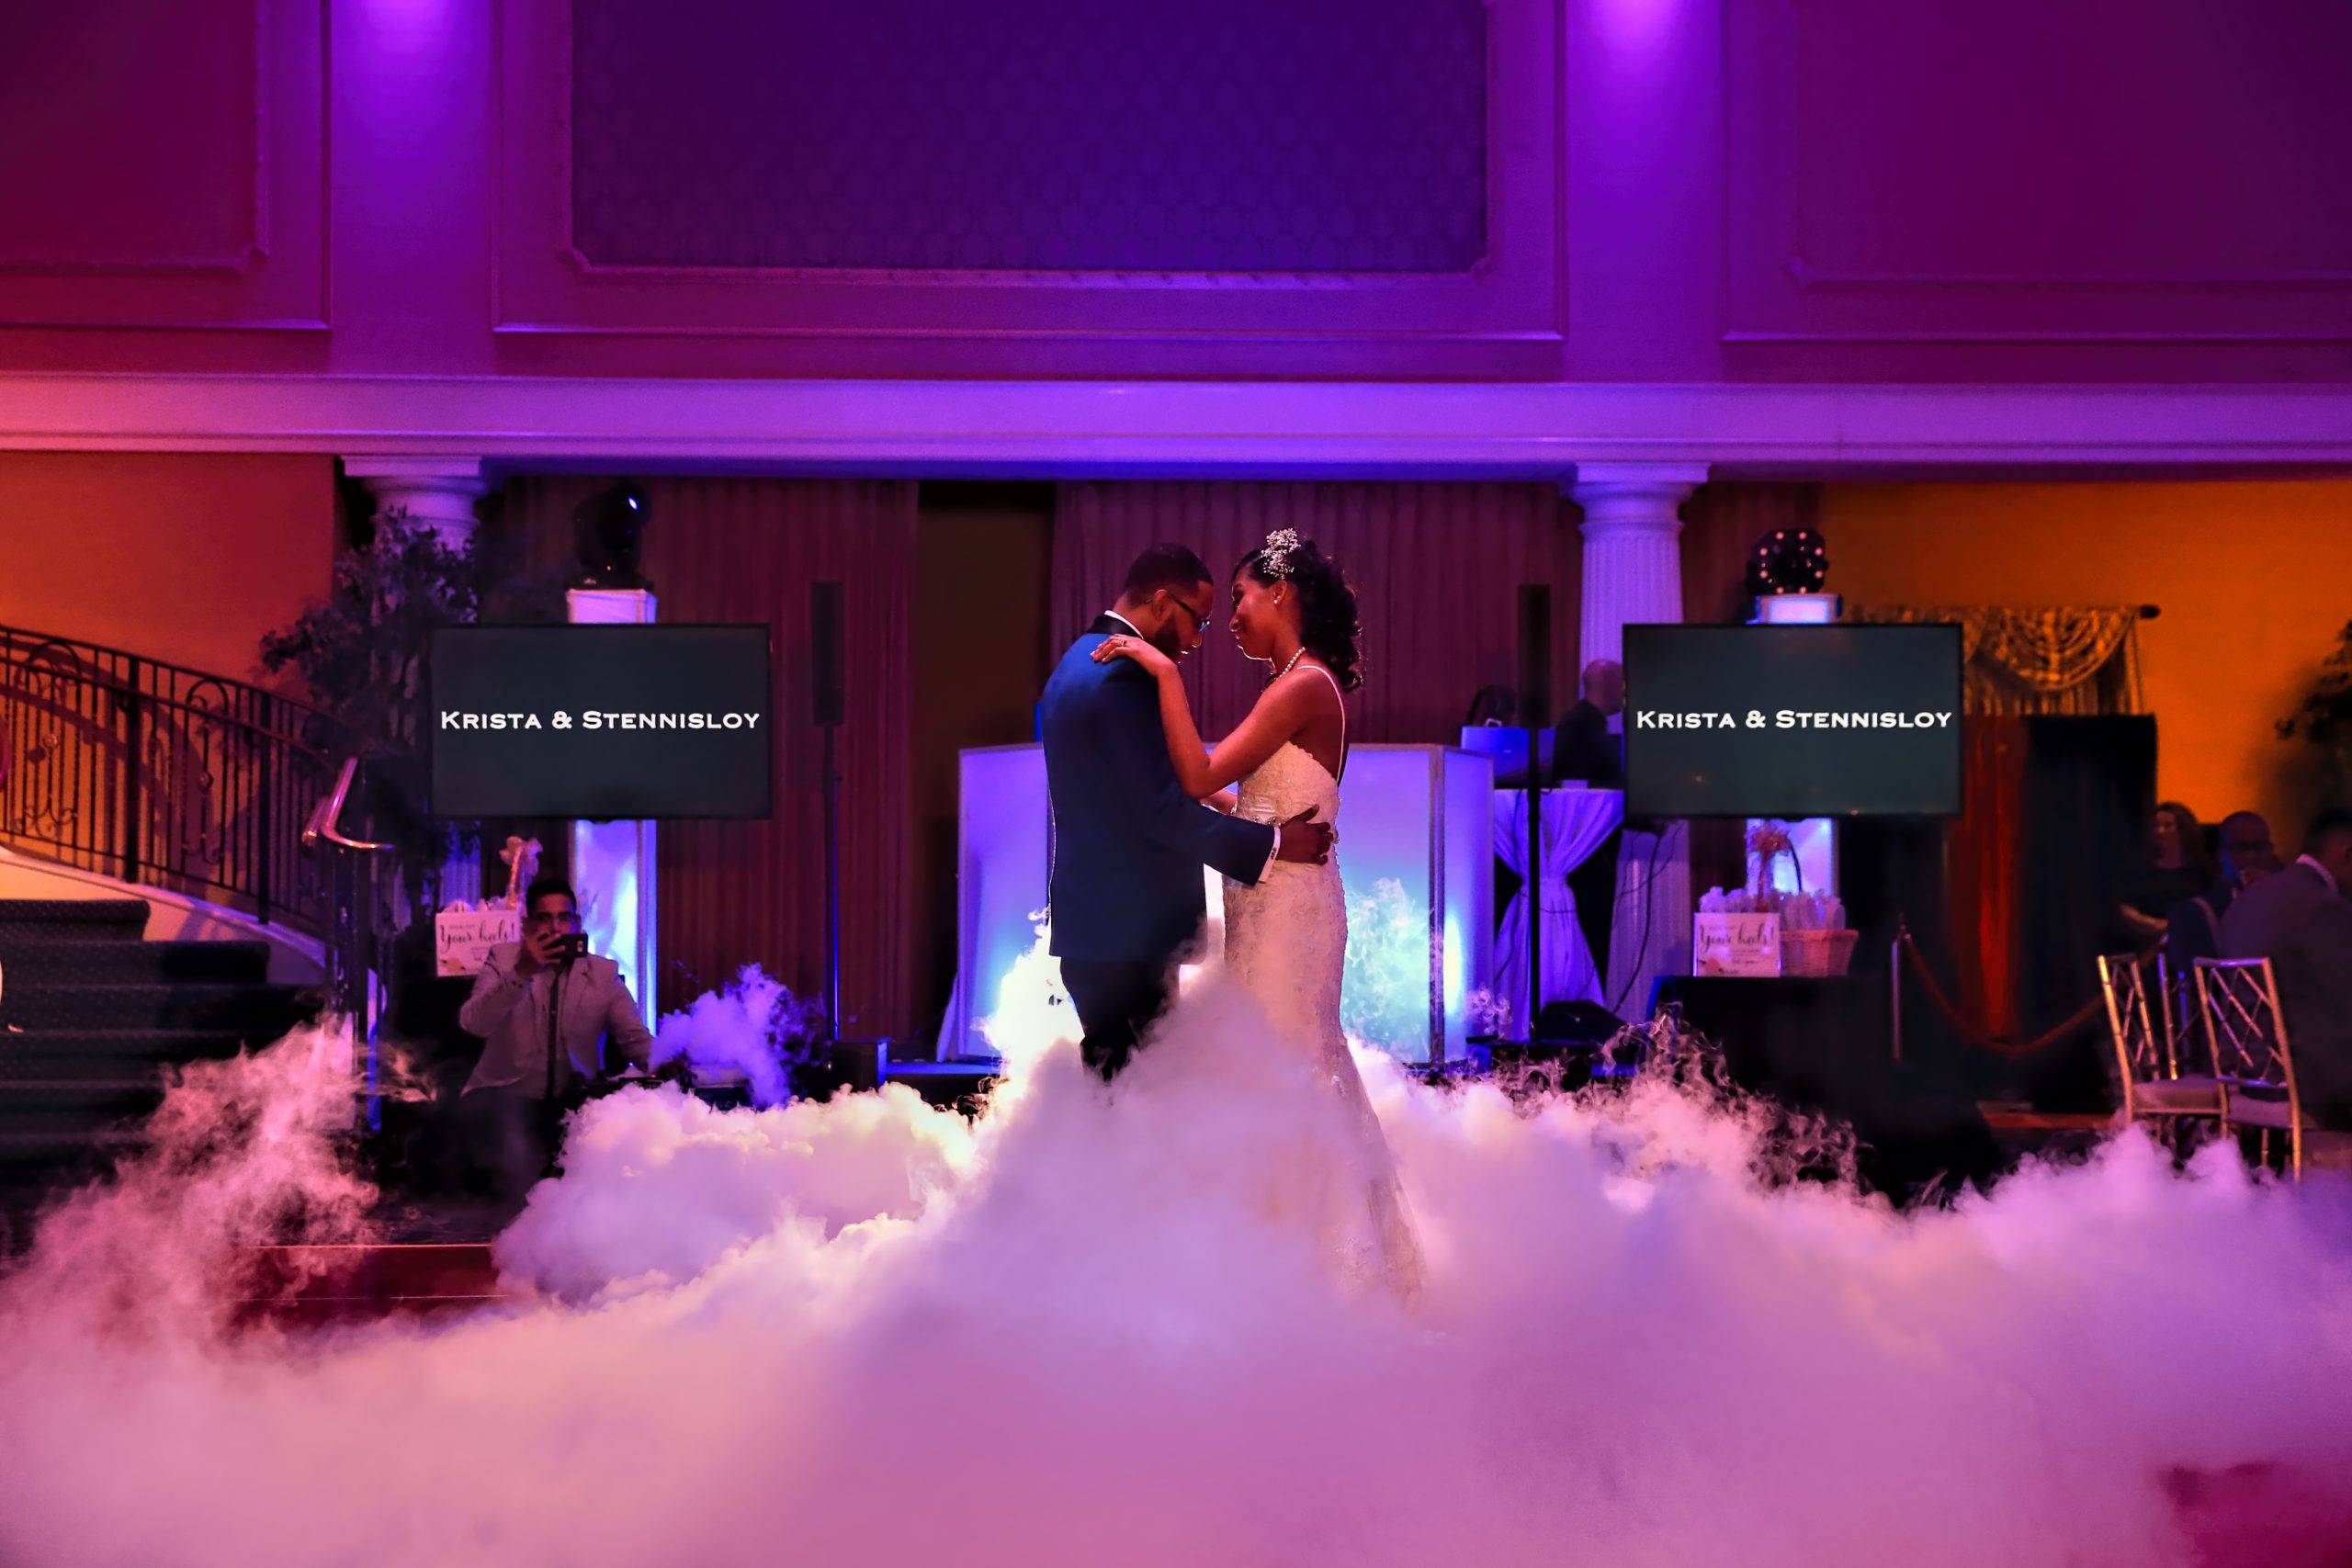 A bride and groom dancing in a cloud of smoke.